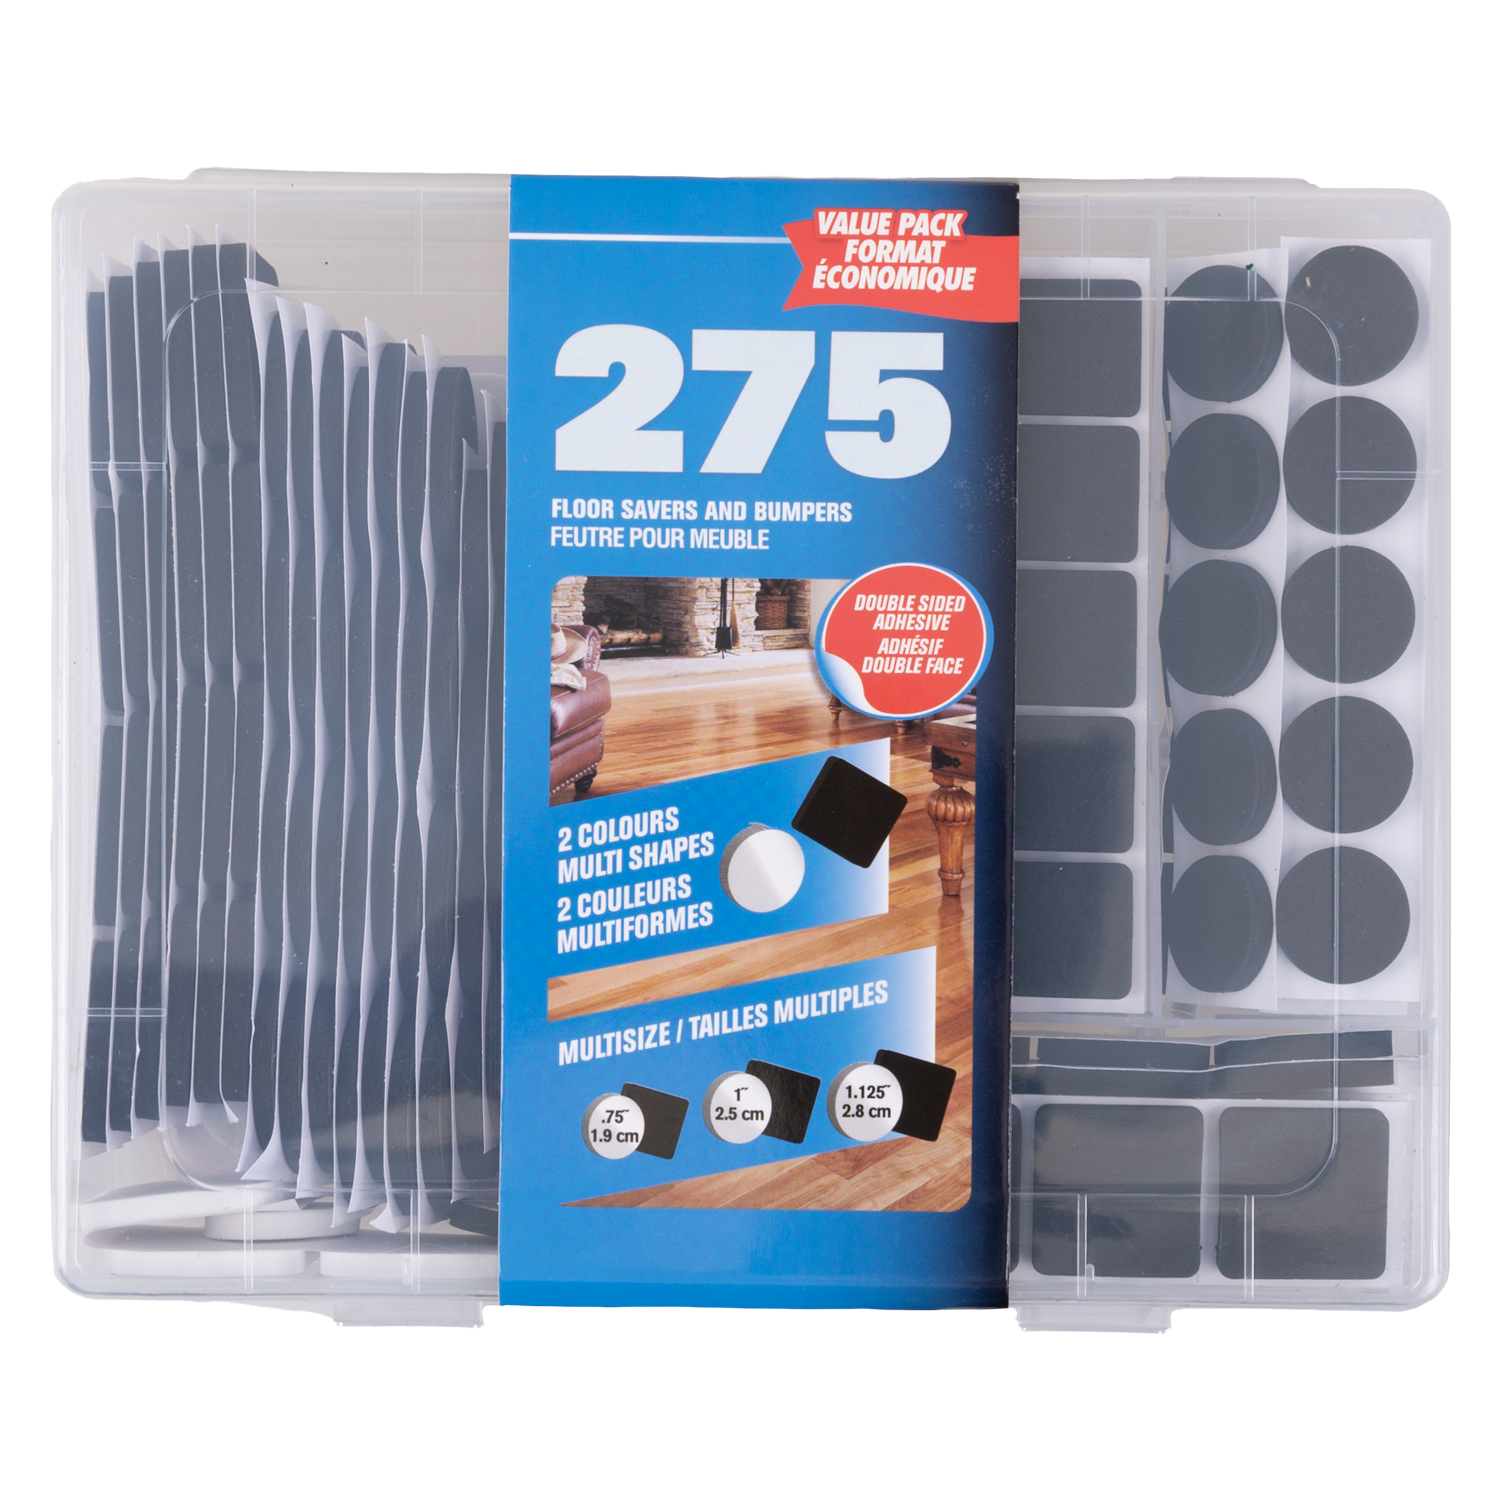 Floor savers and bumpers value pack, 275 pcs